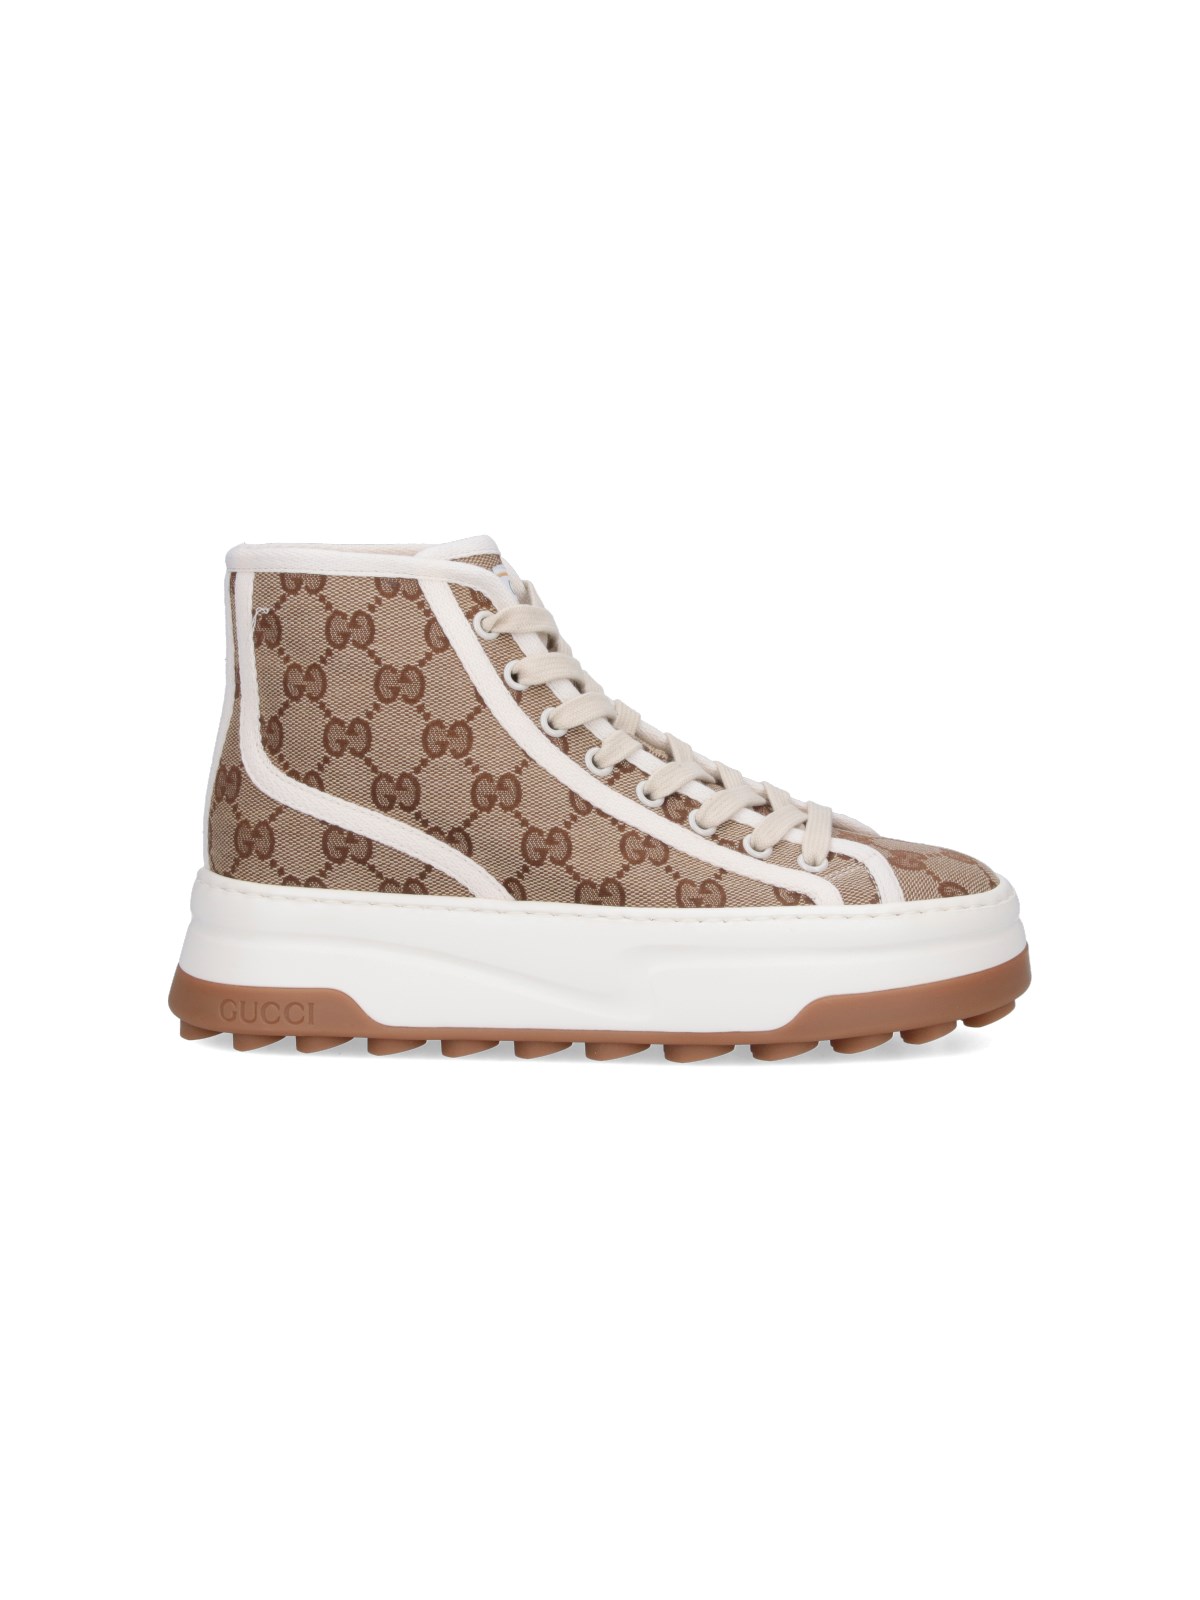 Gucci "gg" High Sneakers In Brown